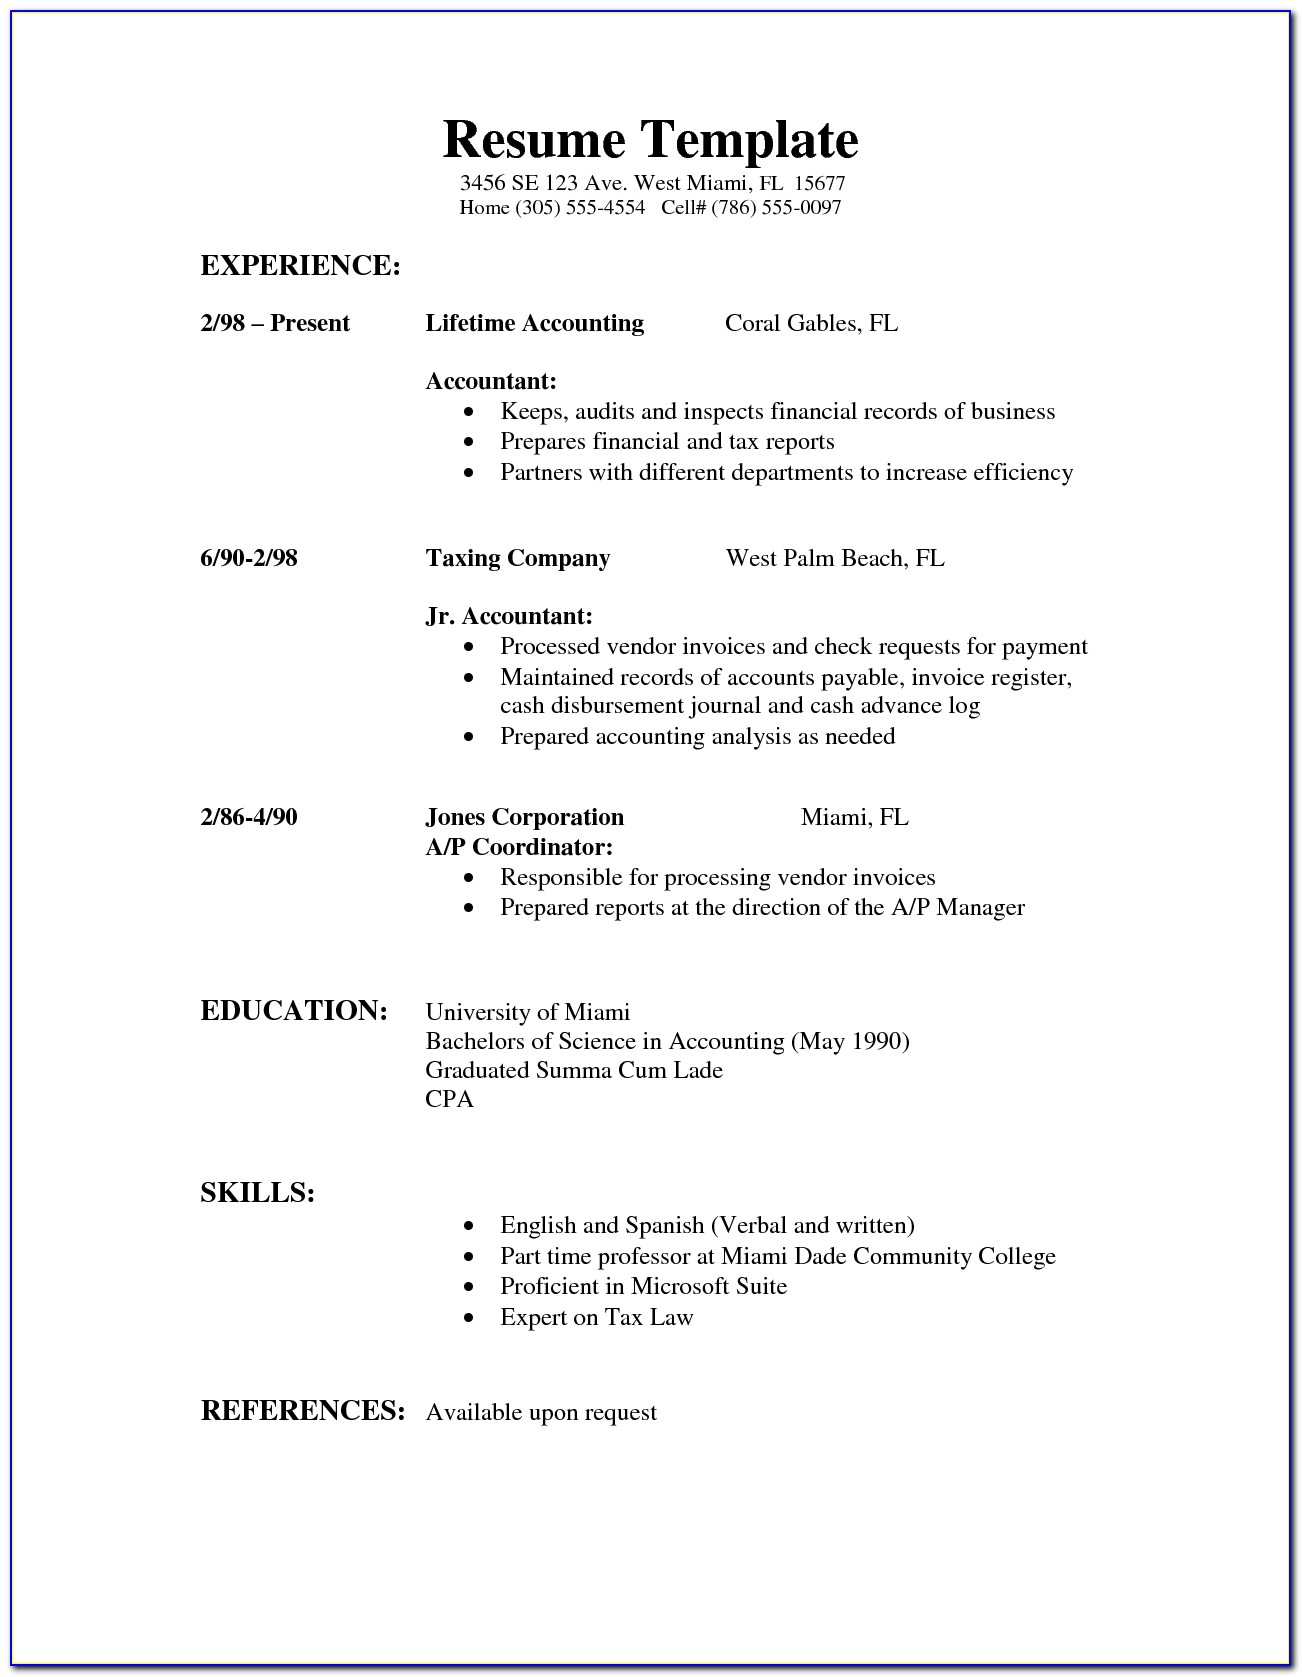 Examples Of Resume Templates